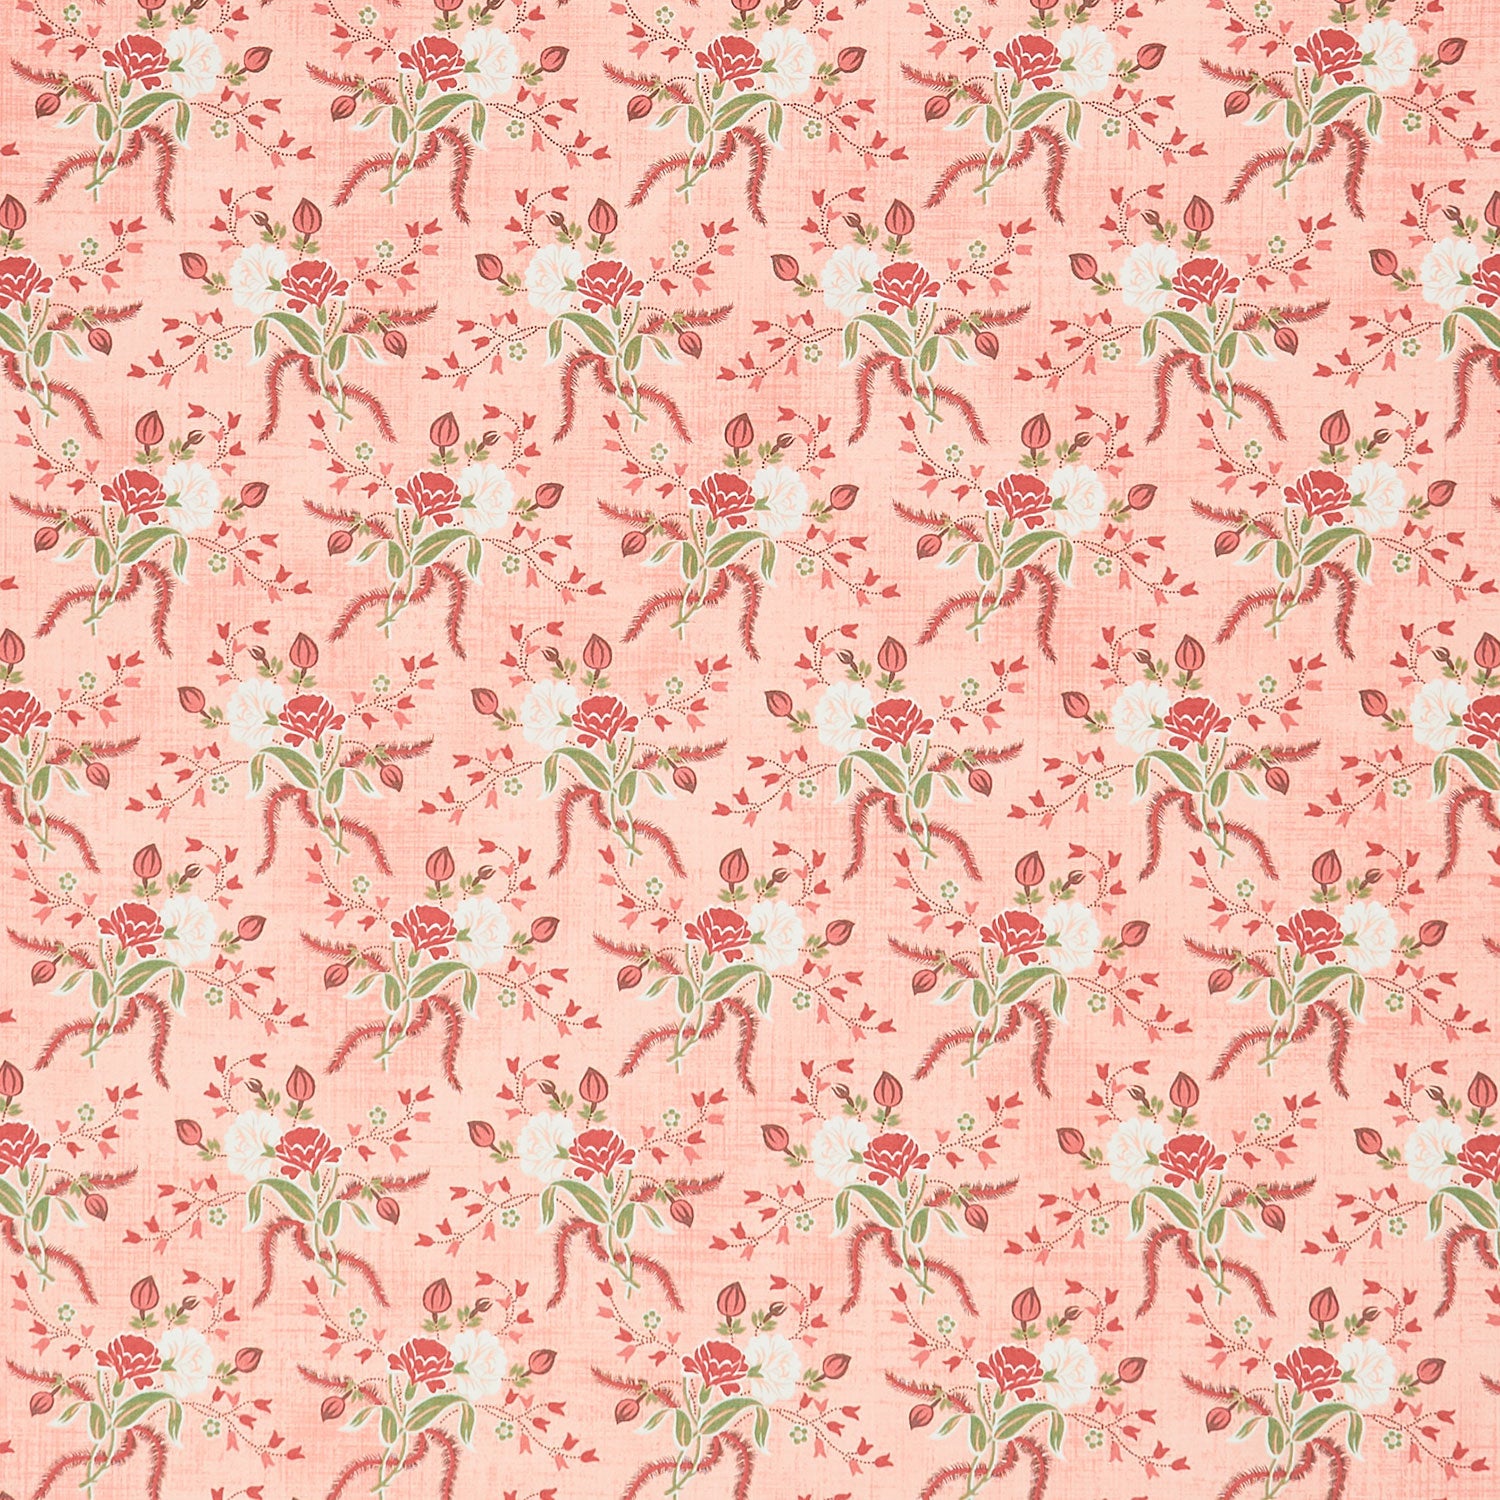 Dinah's Delight 1830-1850 - Ladys Bouquet Sweet Pink Yardage